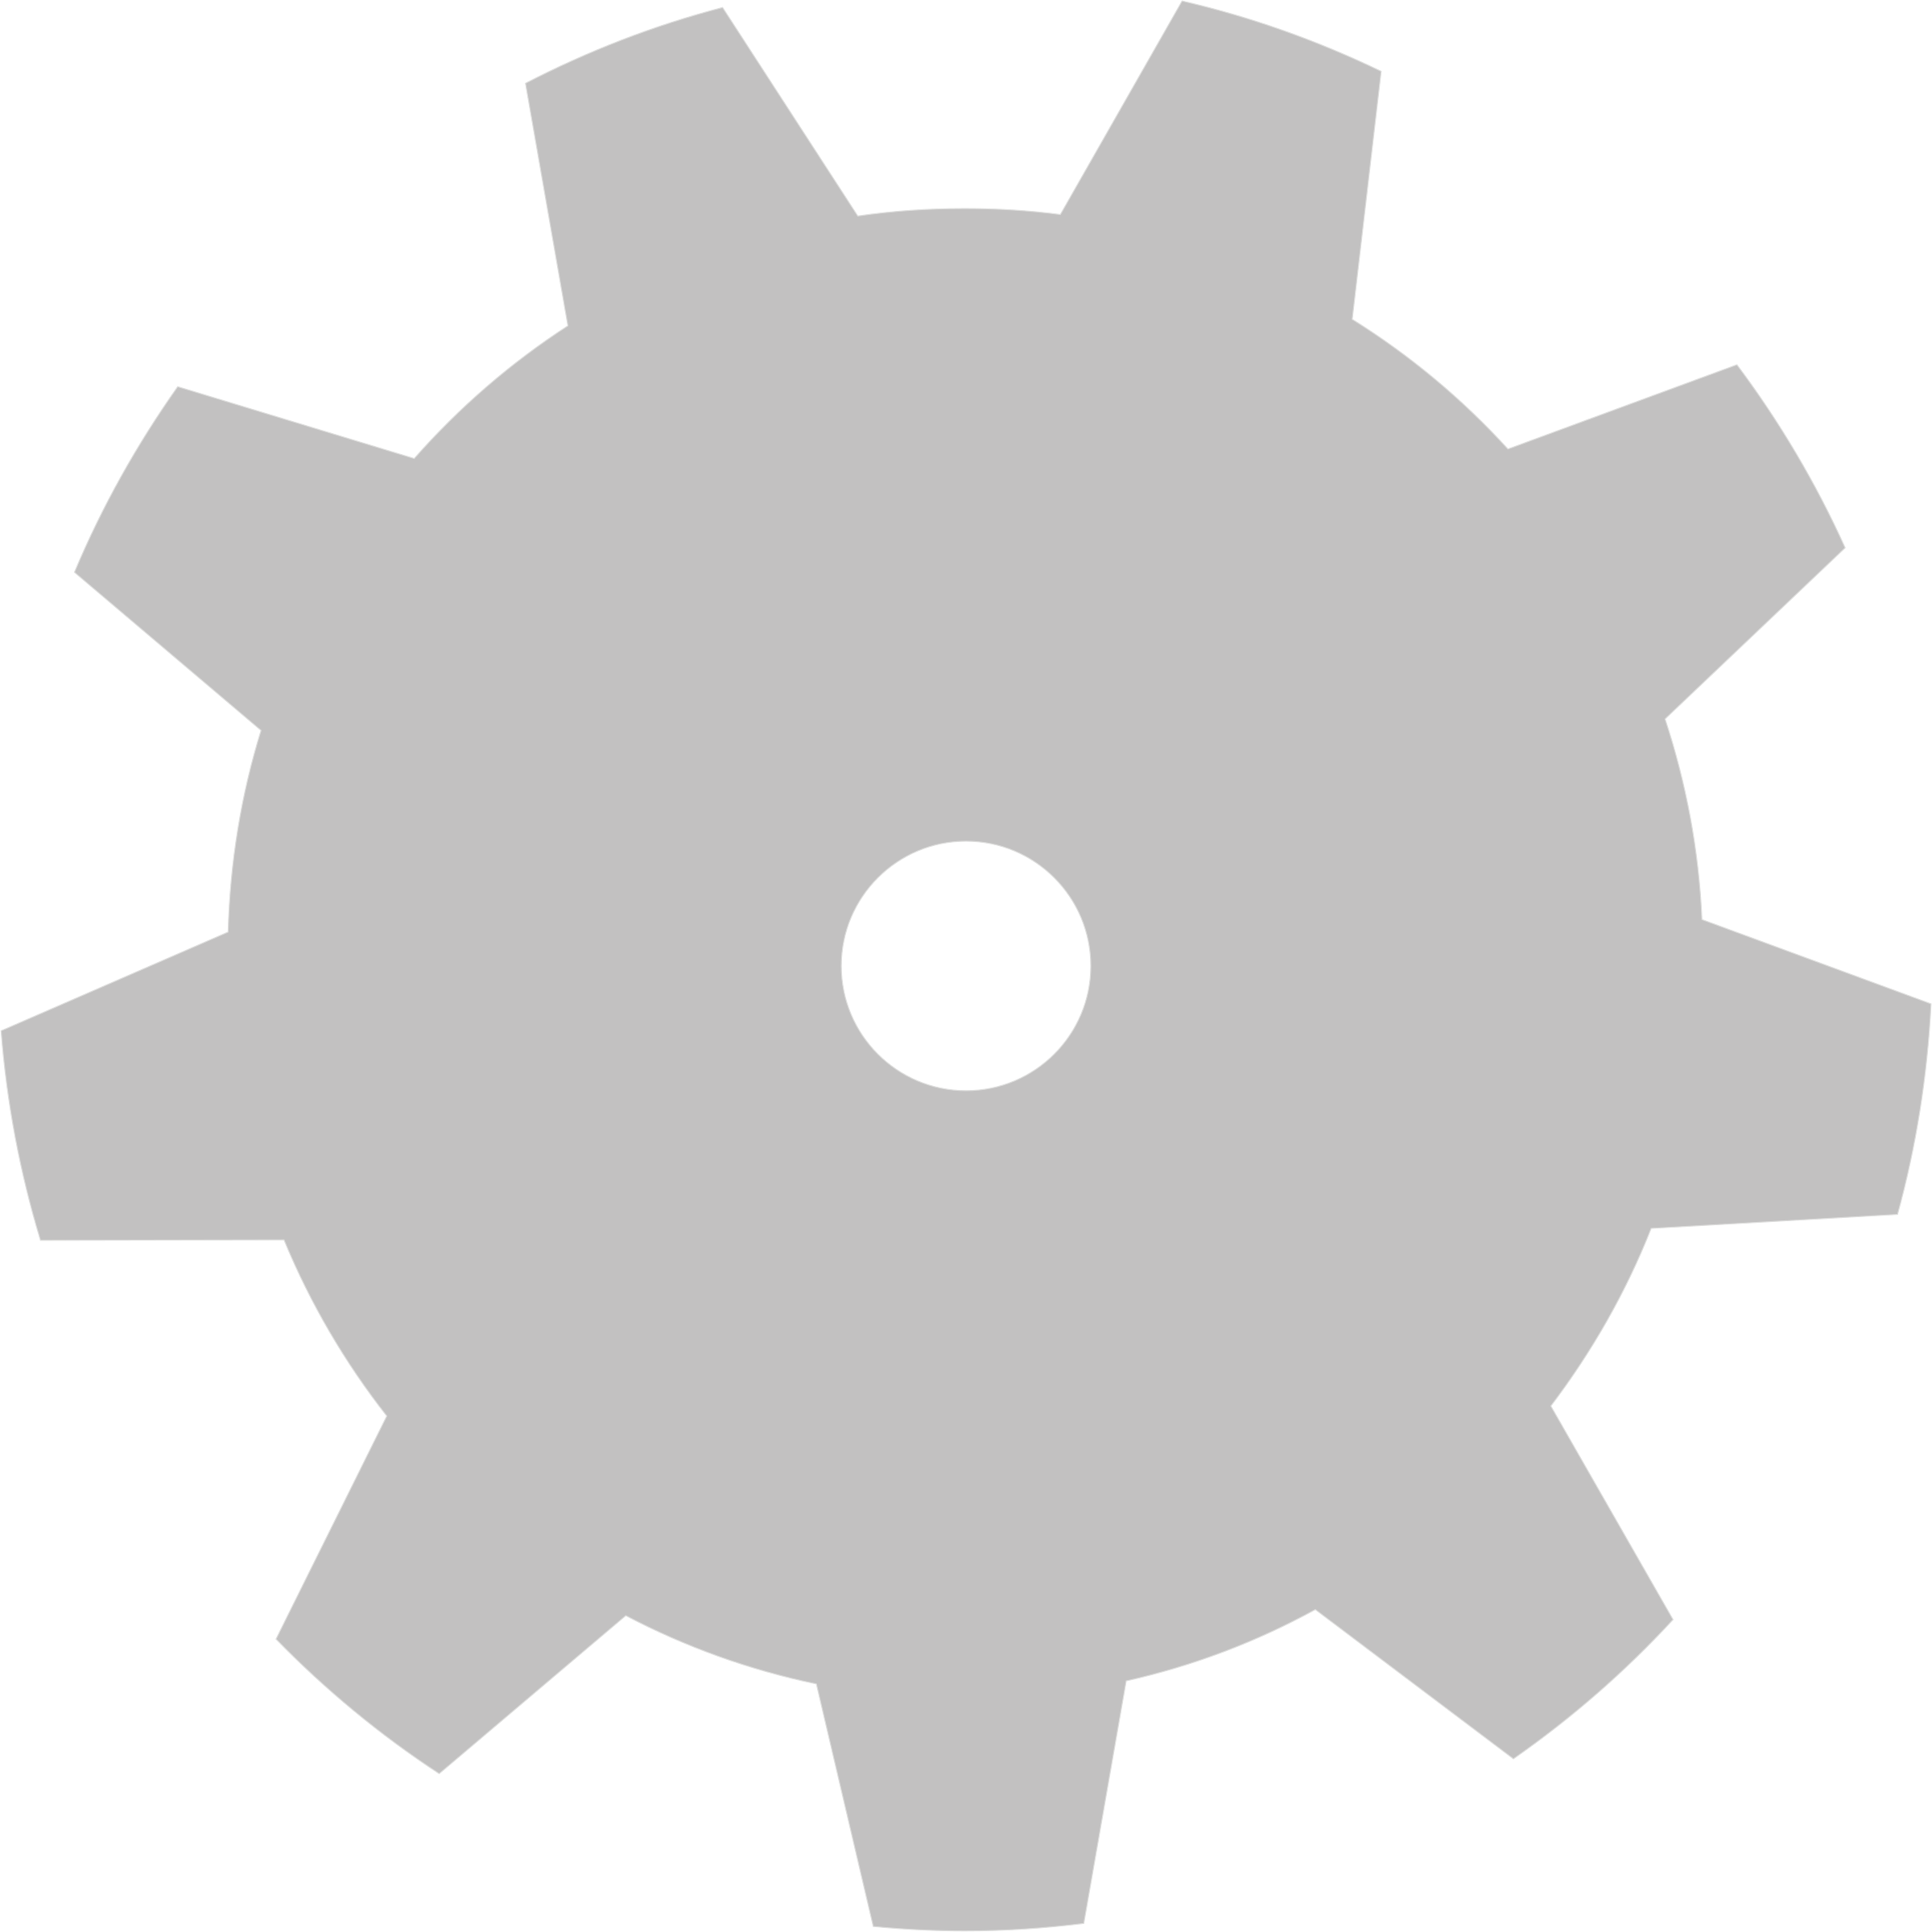 gears clipart simple